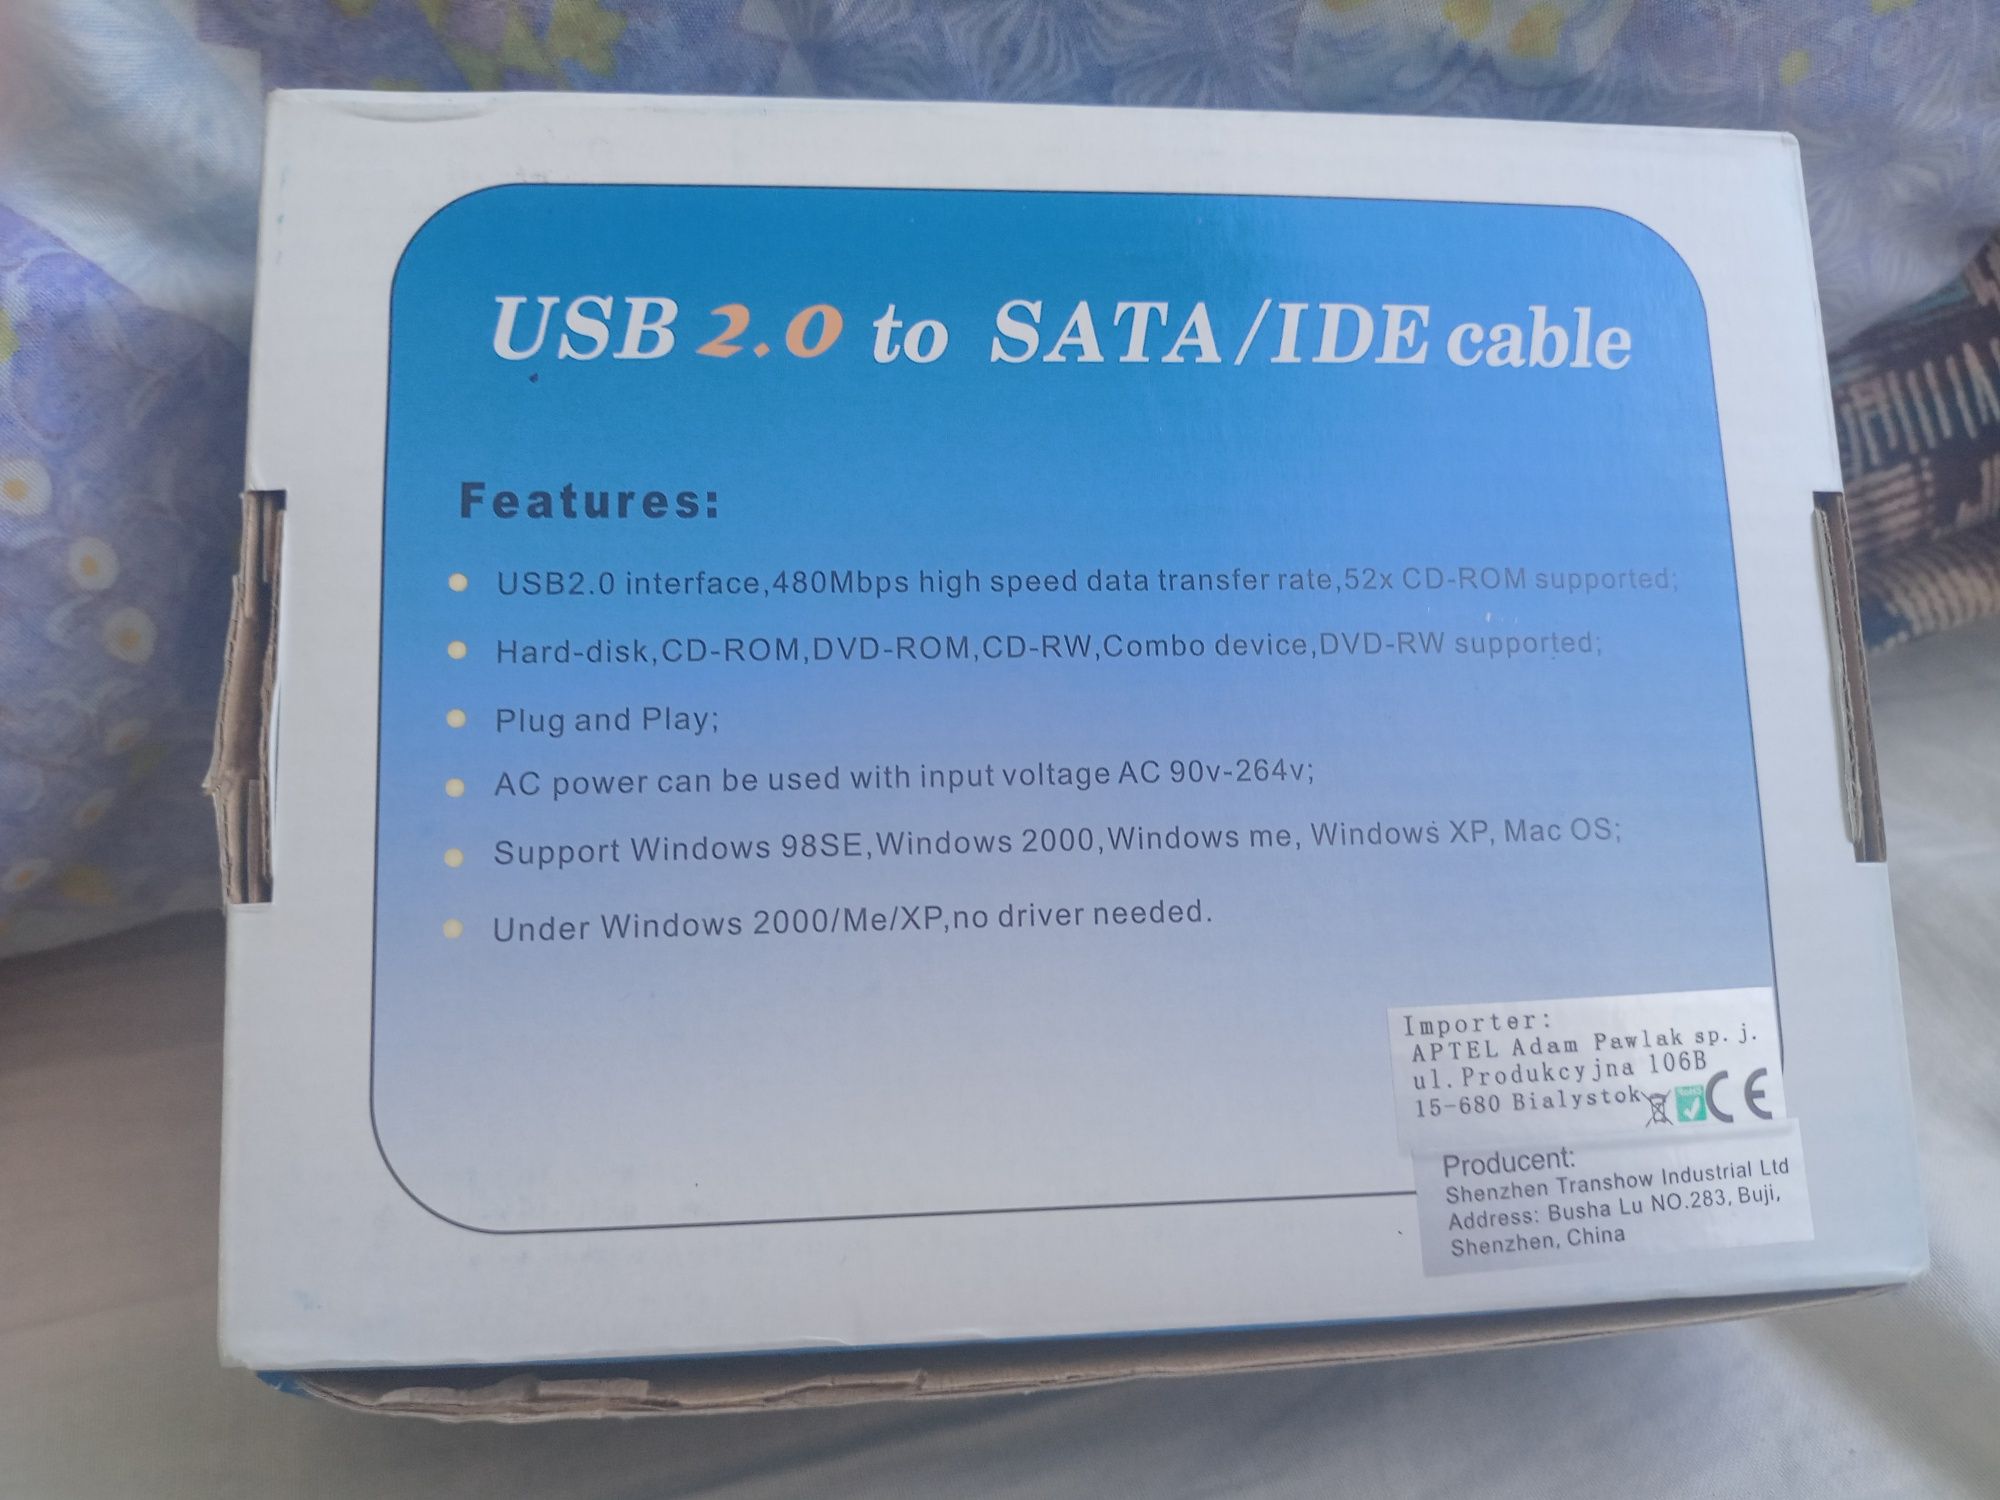 USB 2.0 to Sata/IDE cable